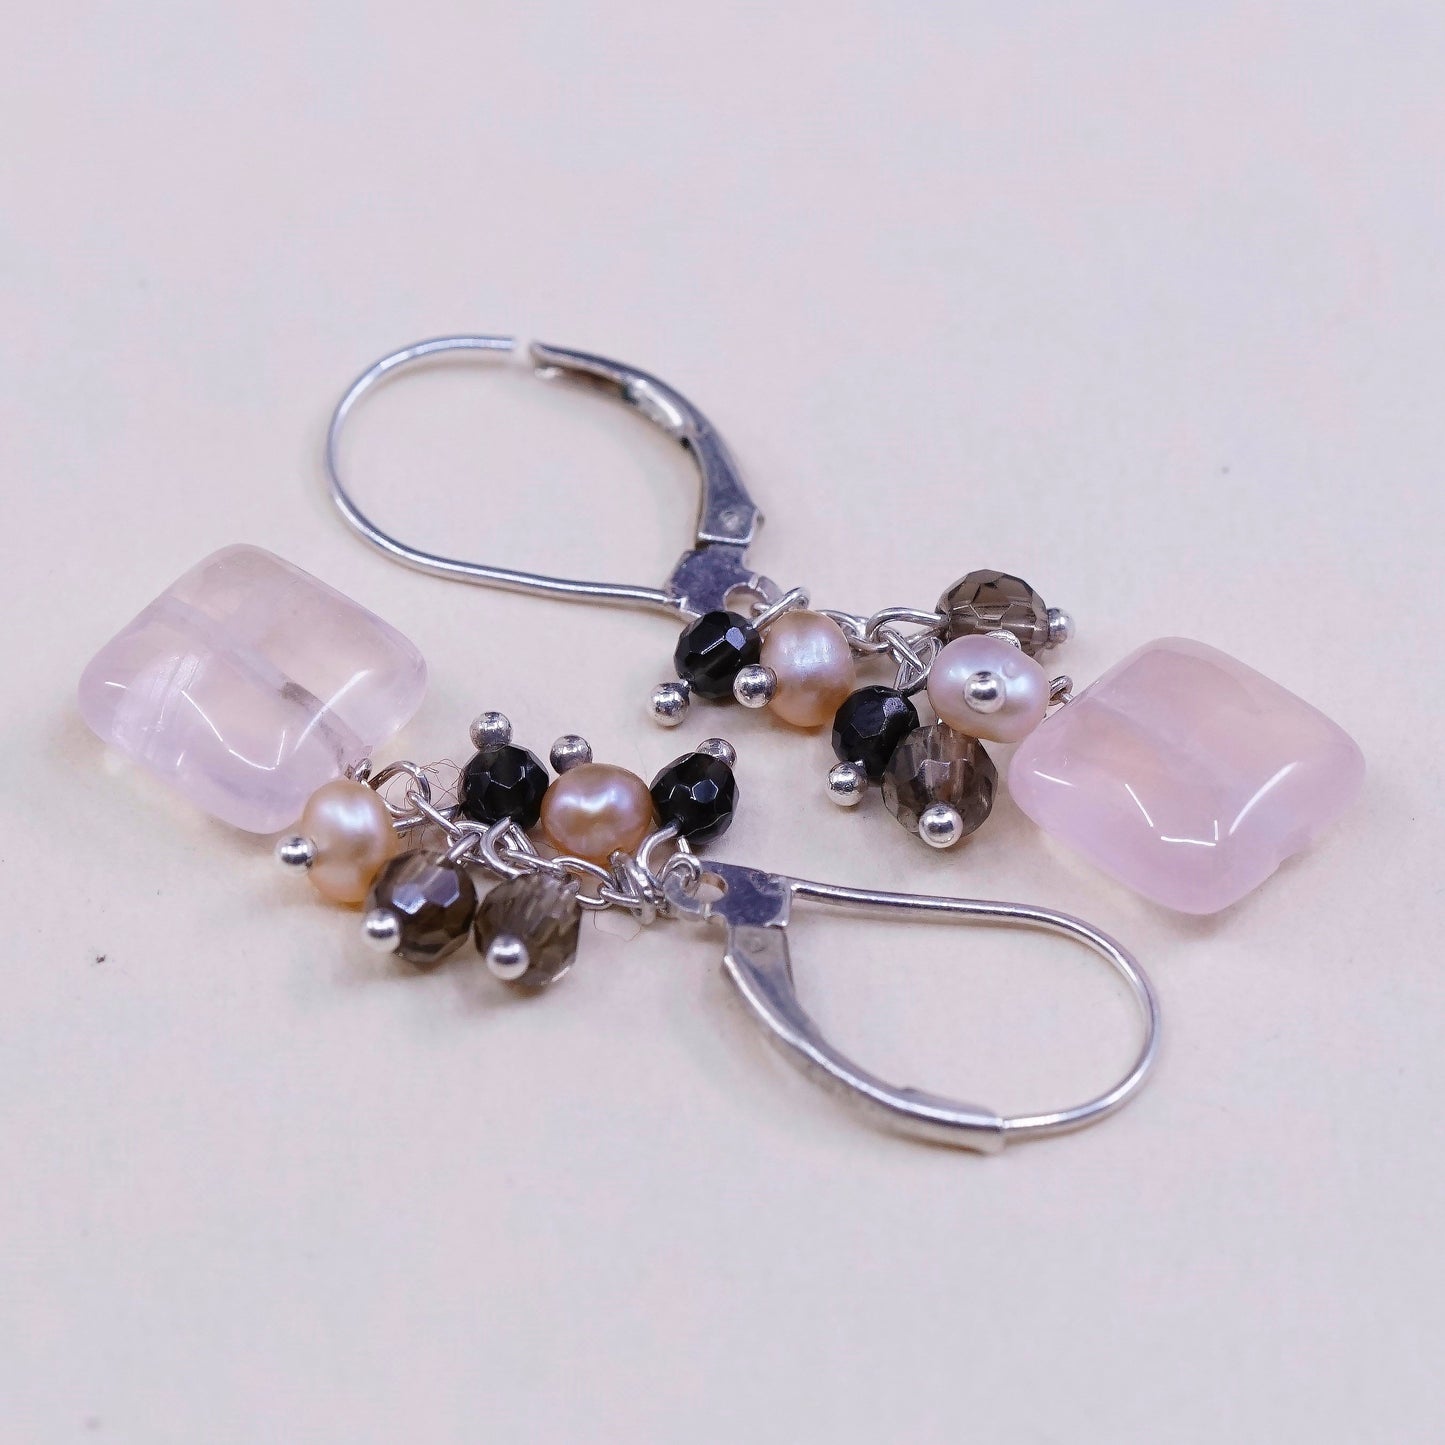 vtg Sterling silver handmade earrings, 925 with cluster pearl and pink quartz